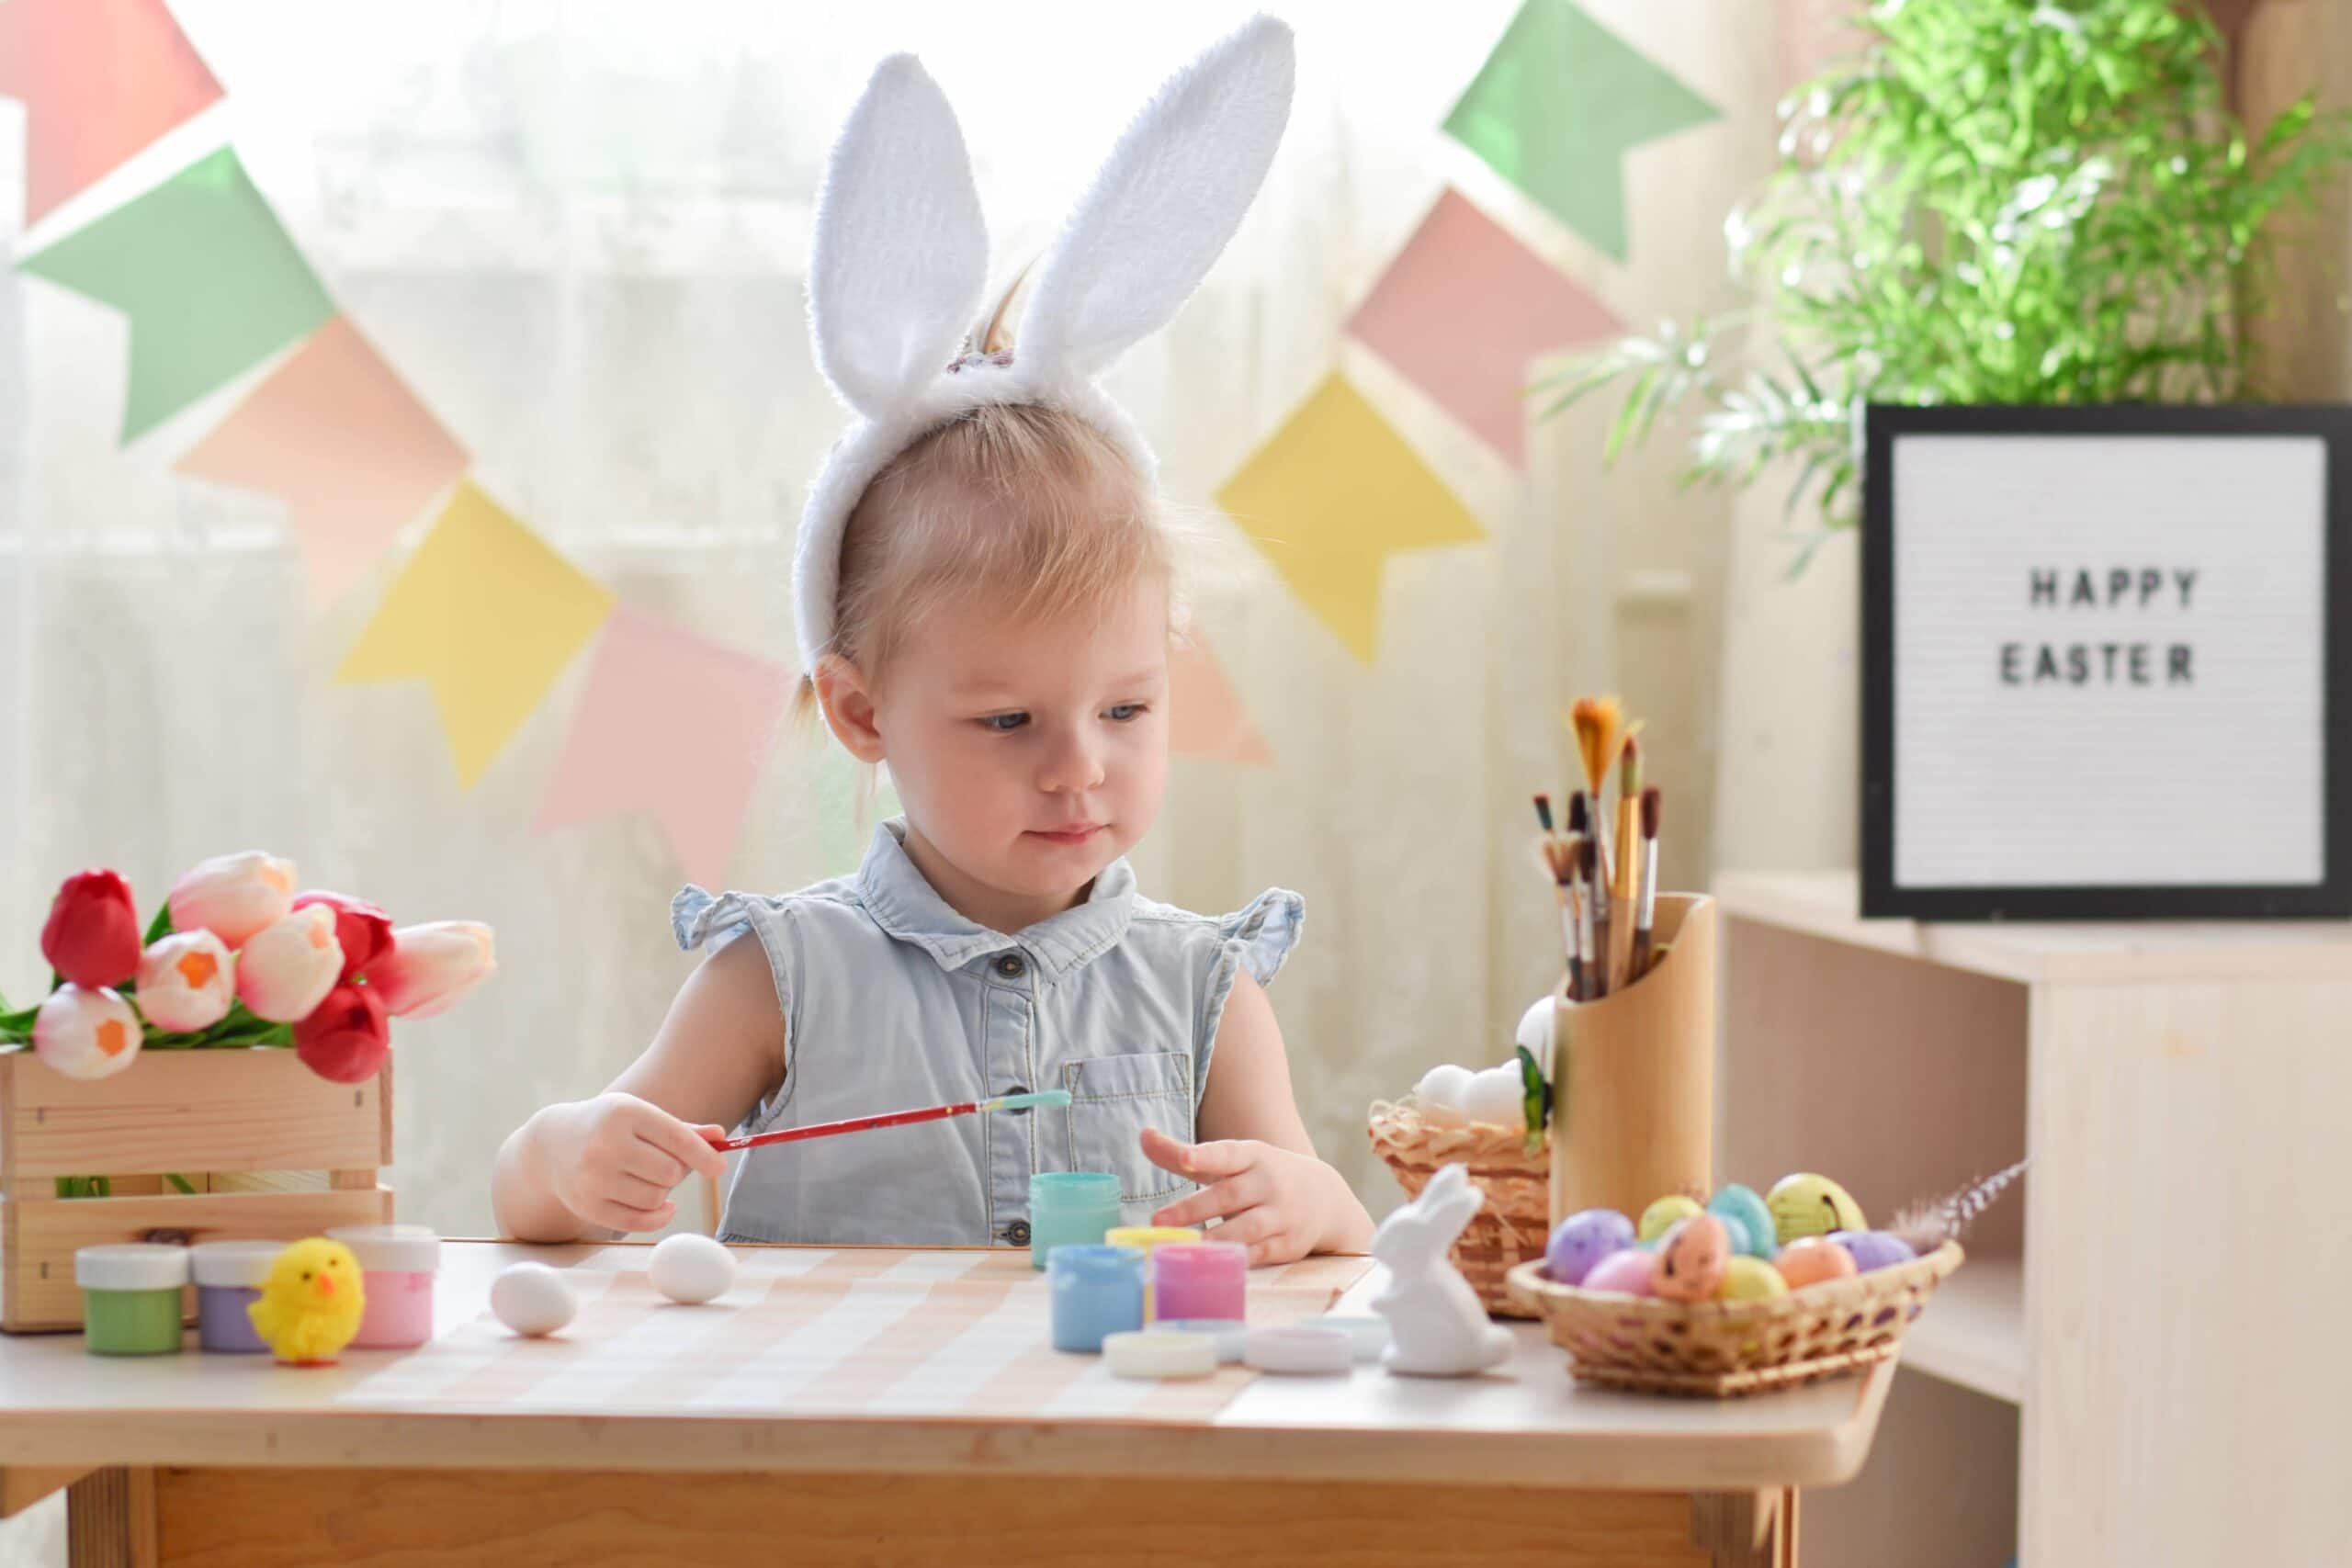 https://www.mother.ly/wp-content/uploads/2022/03/a-two-year-old-girl-in-bunny-ears-draws-easter-eggs-happy-easter-do-it-yourself-the-child-makes_t20_7LbE8v-scaled.jpg